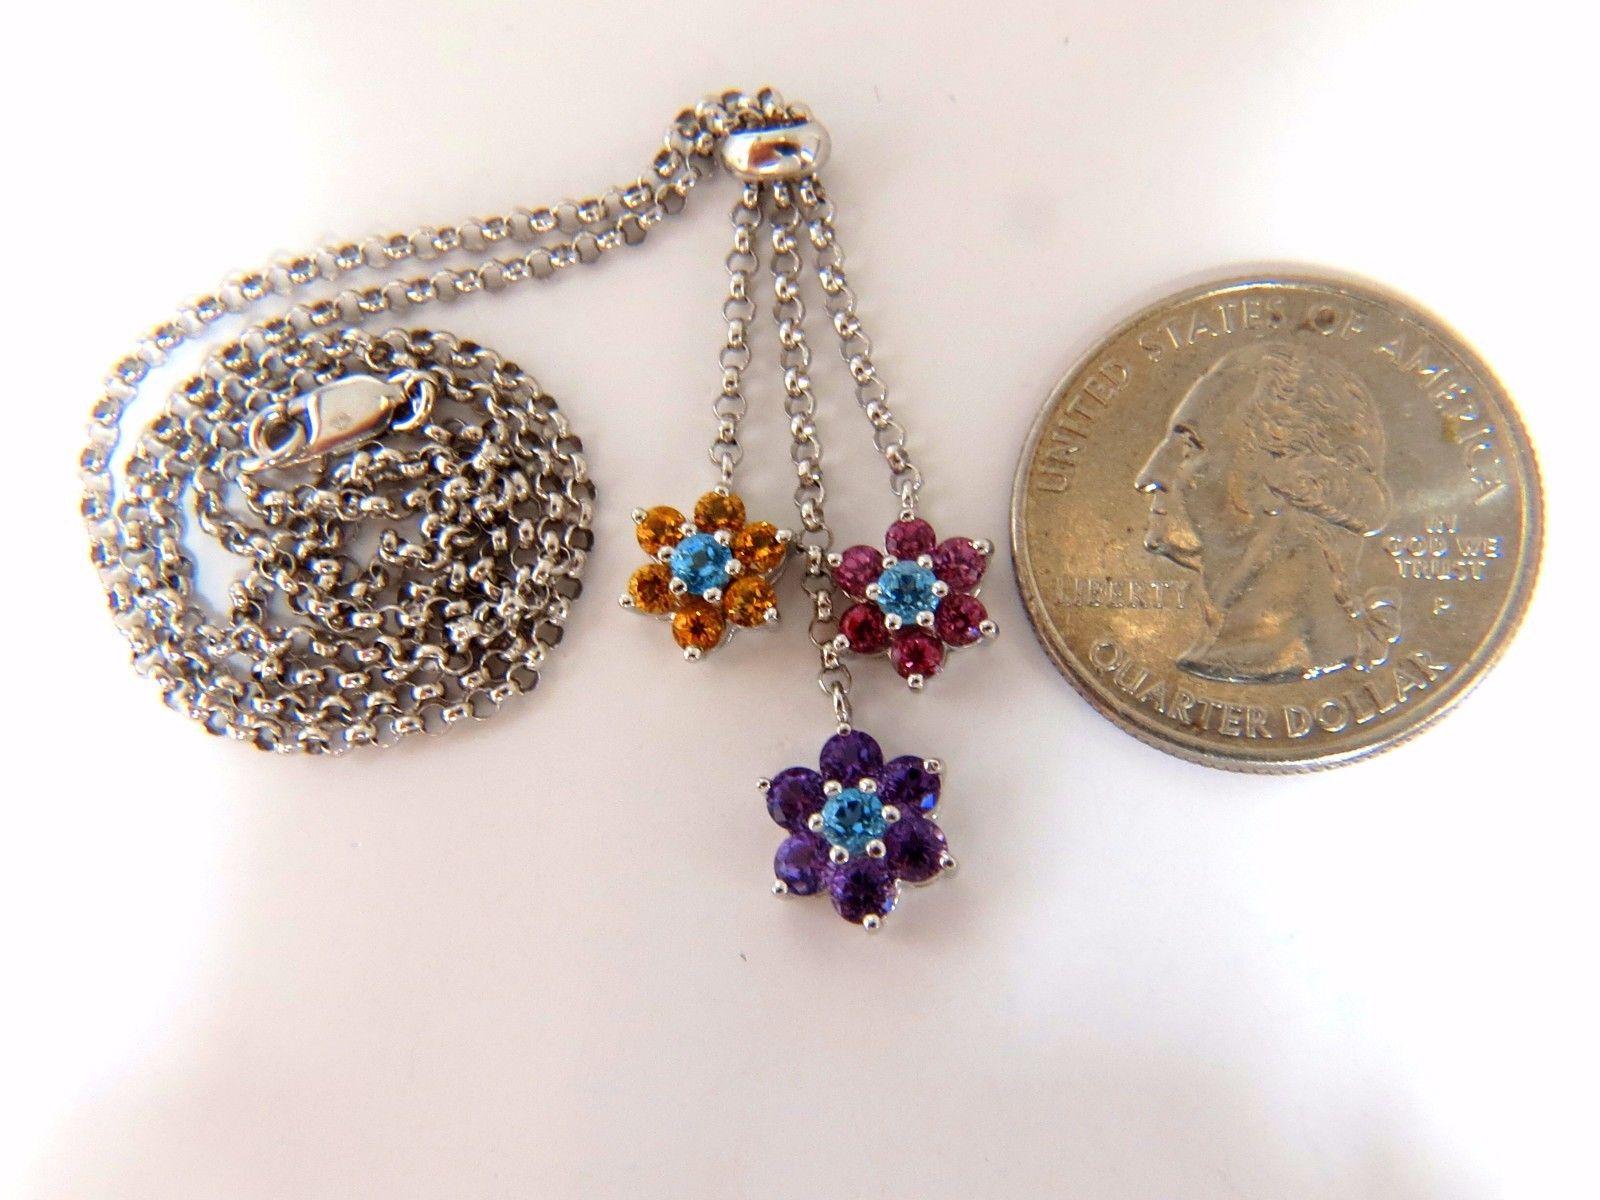 Three tier dangle bolo deco necklace.
Natural Amethyst, blue topaz, pink tourmalines & citrines clusters

All stones of Clean clarity & Transparent.

Full cut rounds.

Each stone: 2.8-3mm.

Full cut, brilliant

Each Cluster Overall Measurement: